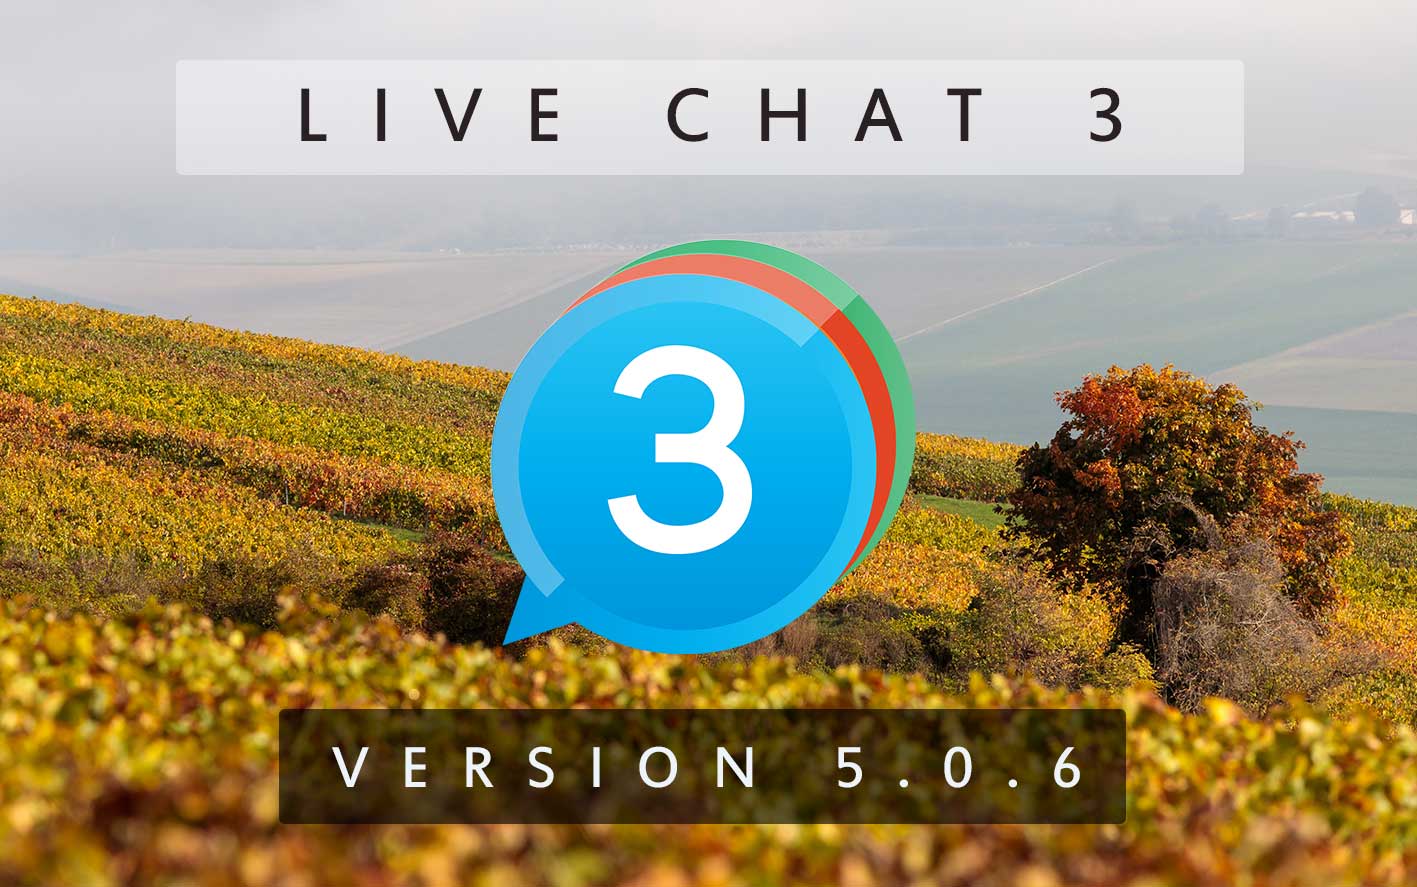 Live Chat 3 - Version 5.0.6